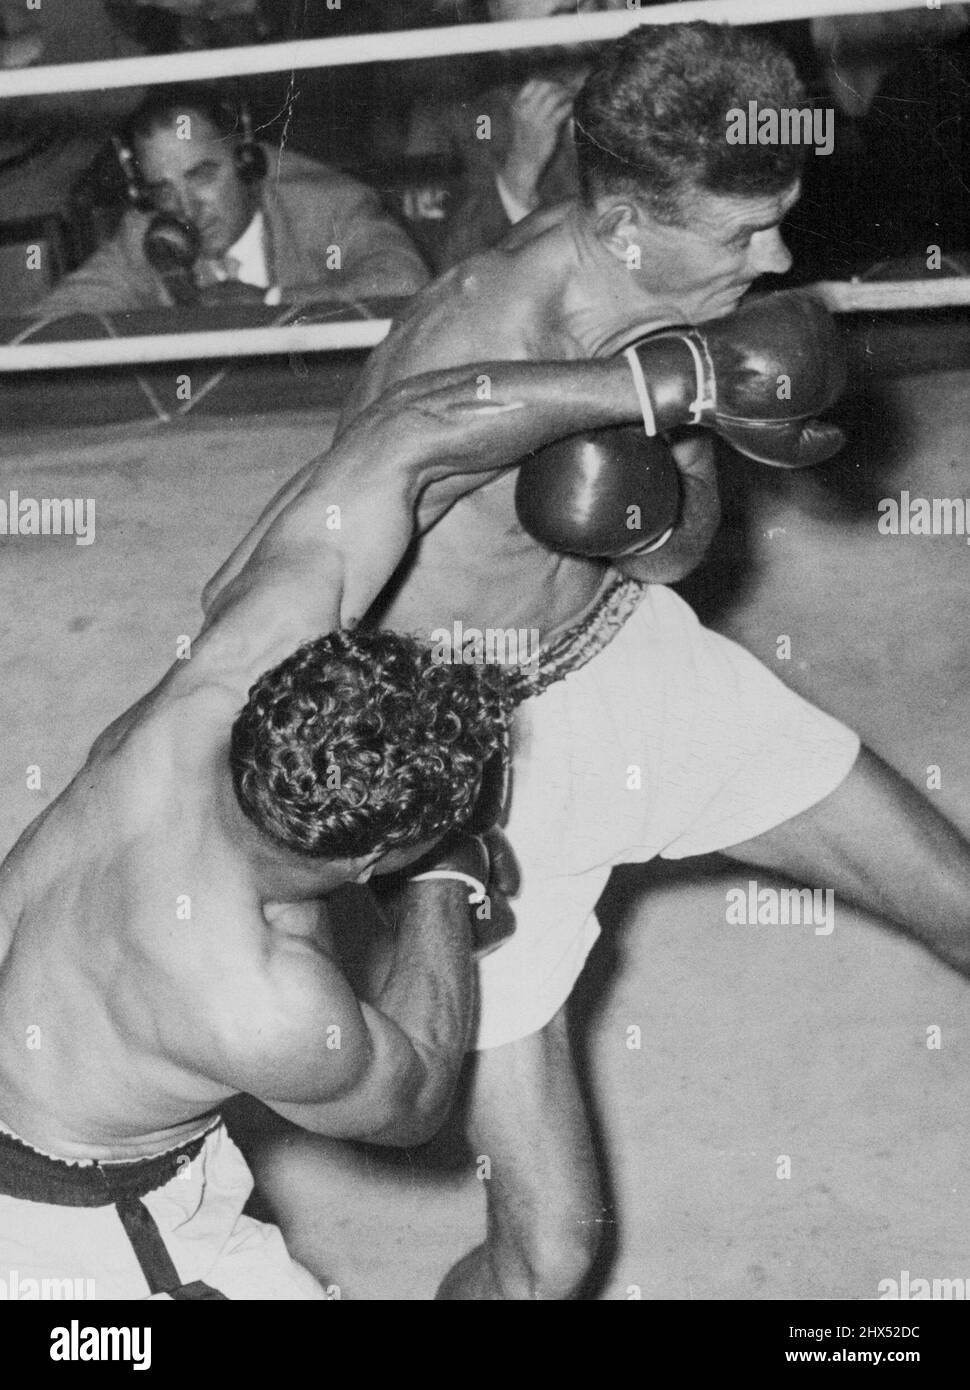 Alf Sands lands a left to the chin in his points win over Al Bourke at the Stadium last night. Bourke, who is Australian middleweight champion, was clearly beaten. February 10, 1953. Stock Photo